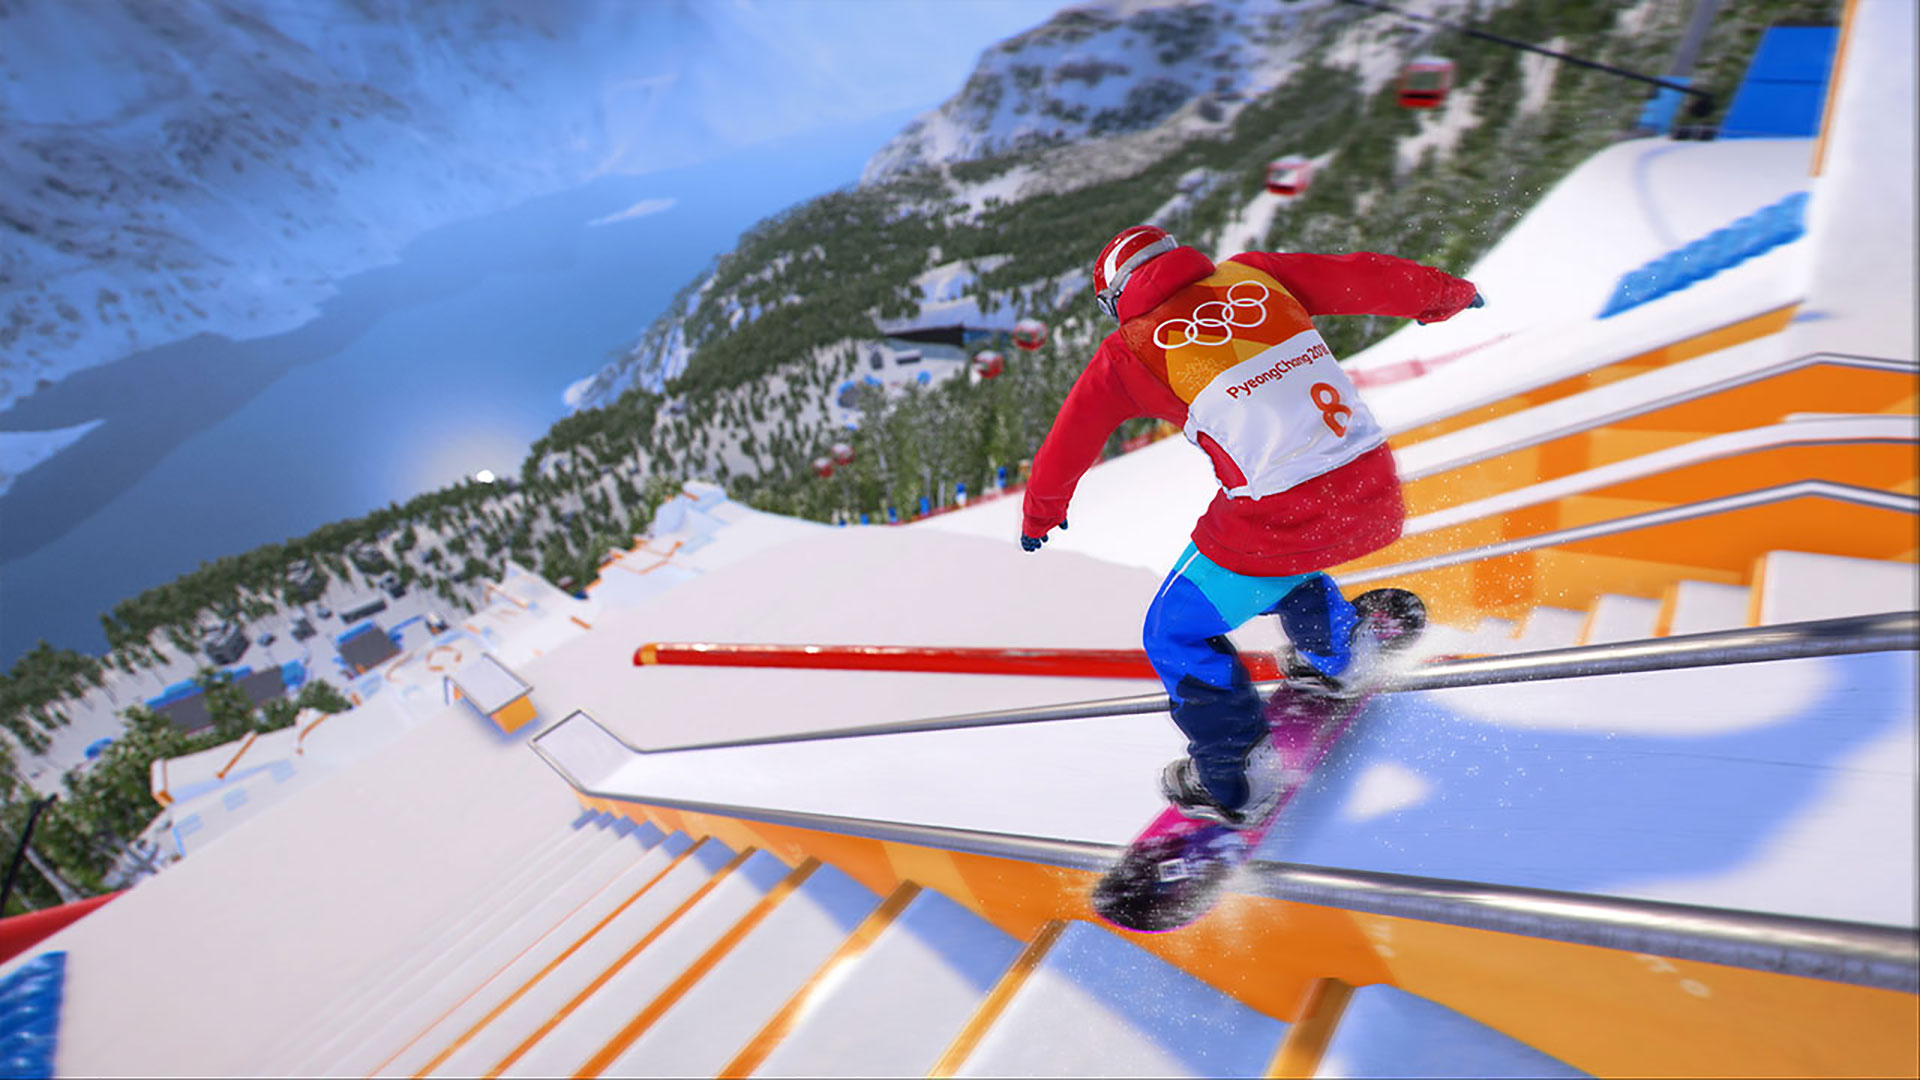 Russia is still eligible to compete in 'Steep: Road to the Olympics